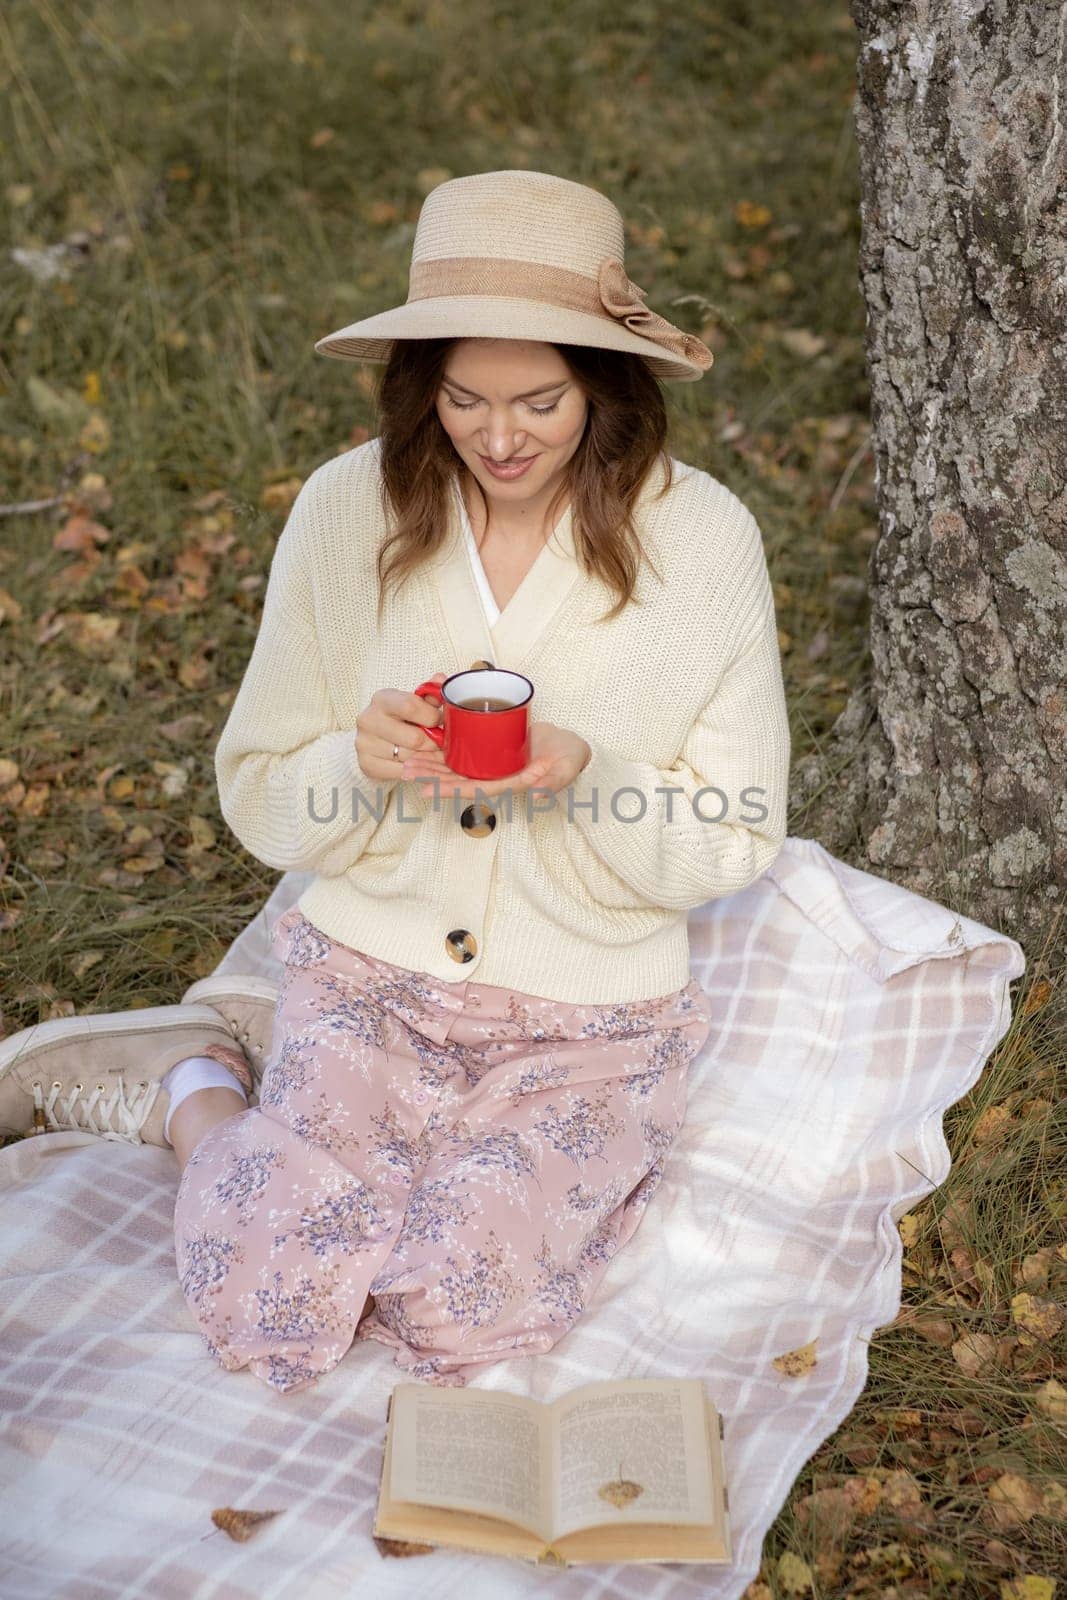 A young beautiful woman in a dress and a round hat reads a book outdoors in the forest and drinks tea. Romantic and vintage photo of a beautiful girl. Reading and relaxation